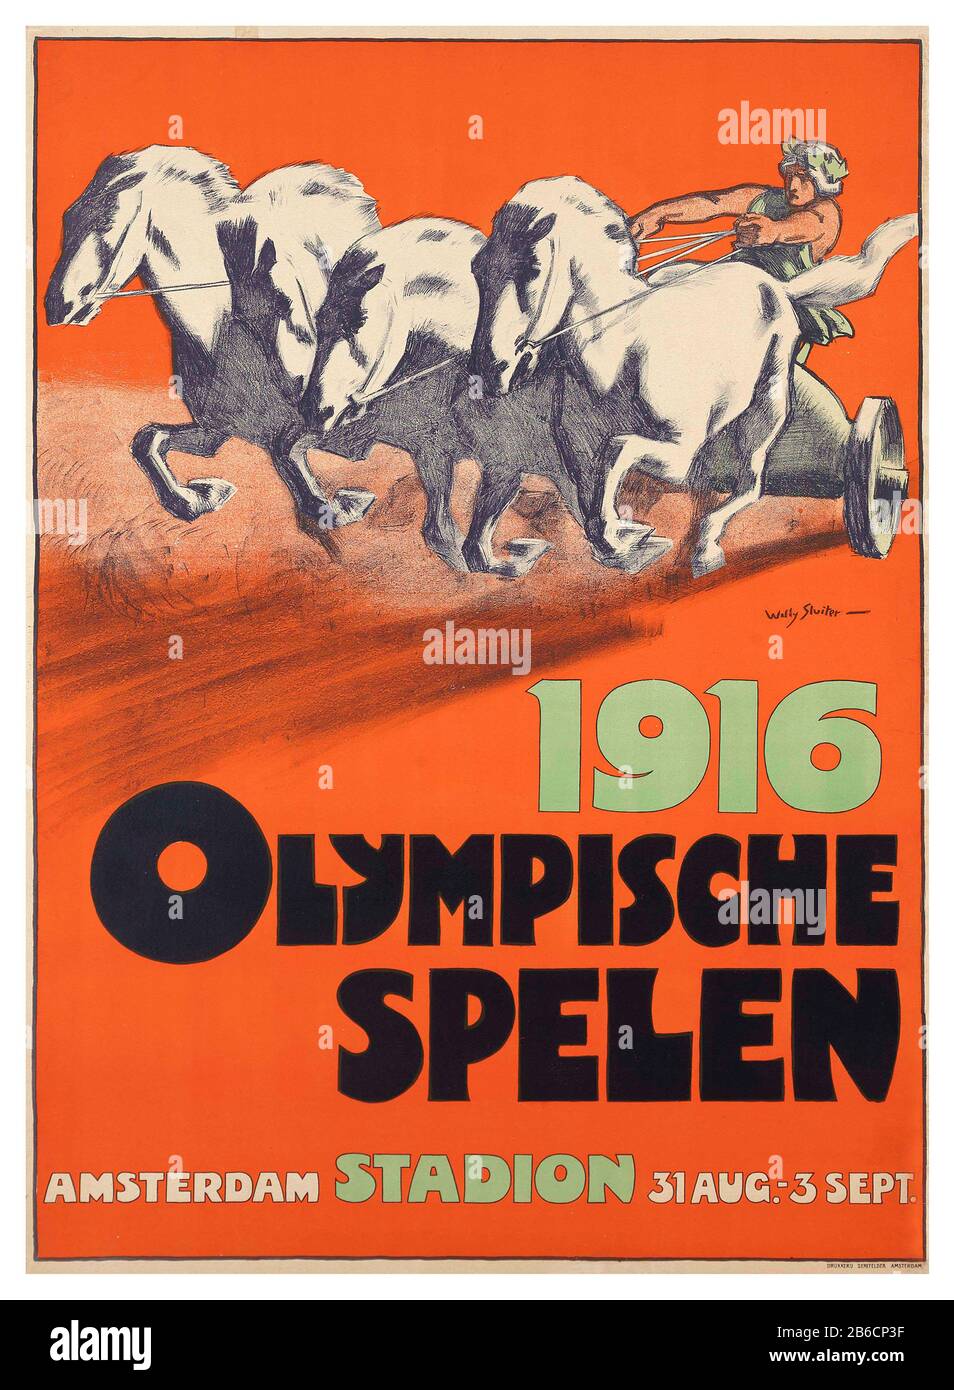 Vintage Olympic Games Poster 1916 *CANCELLED  DUE TO WORLD WAR 1* Amsterdam Stadium Holland 1916 31st August-3rd September OLYMPISCHE SPELEN lithograph in colours, 1916, printed by Drukkerij Senefelder, Amsterdam, artist Willy (Jan Willem) Sluiter (1873-1949) Stock Photo